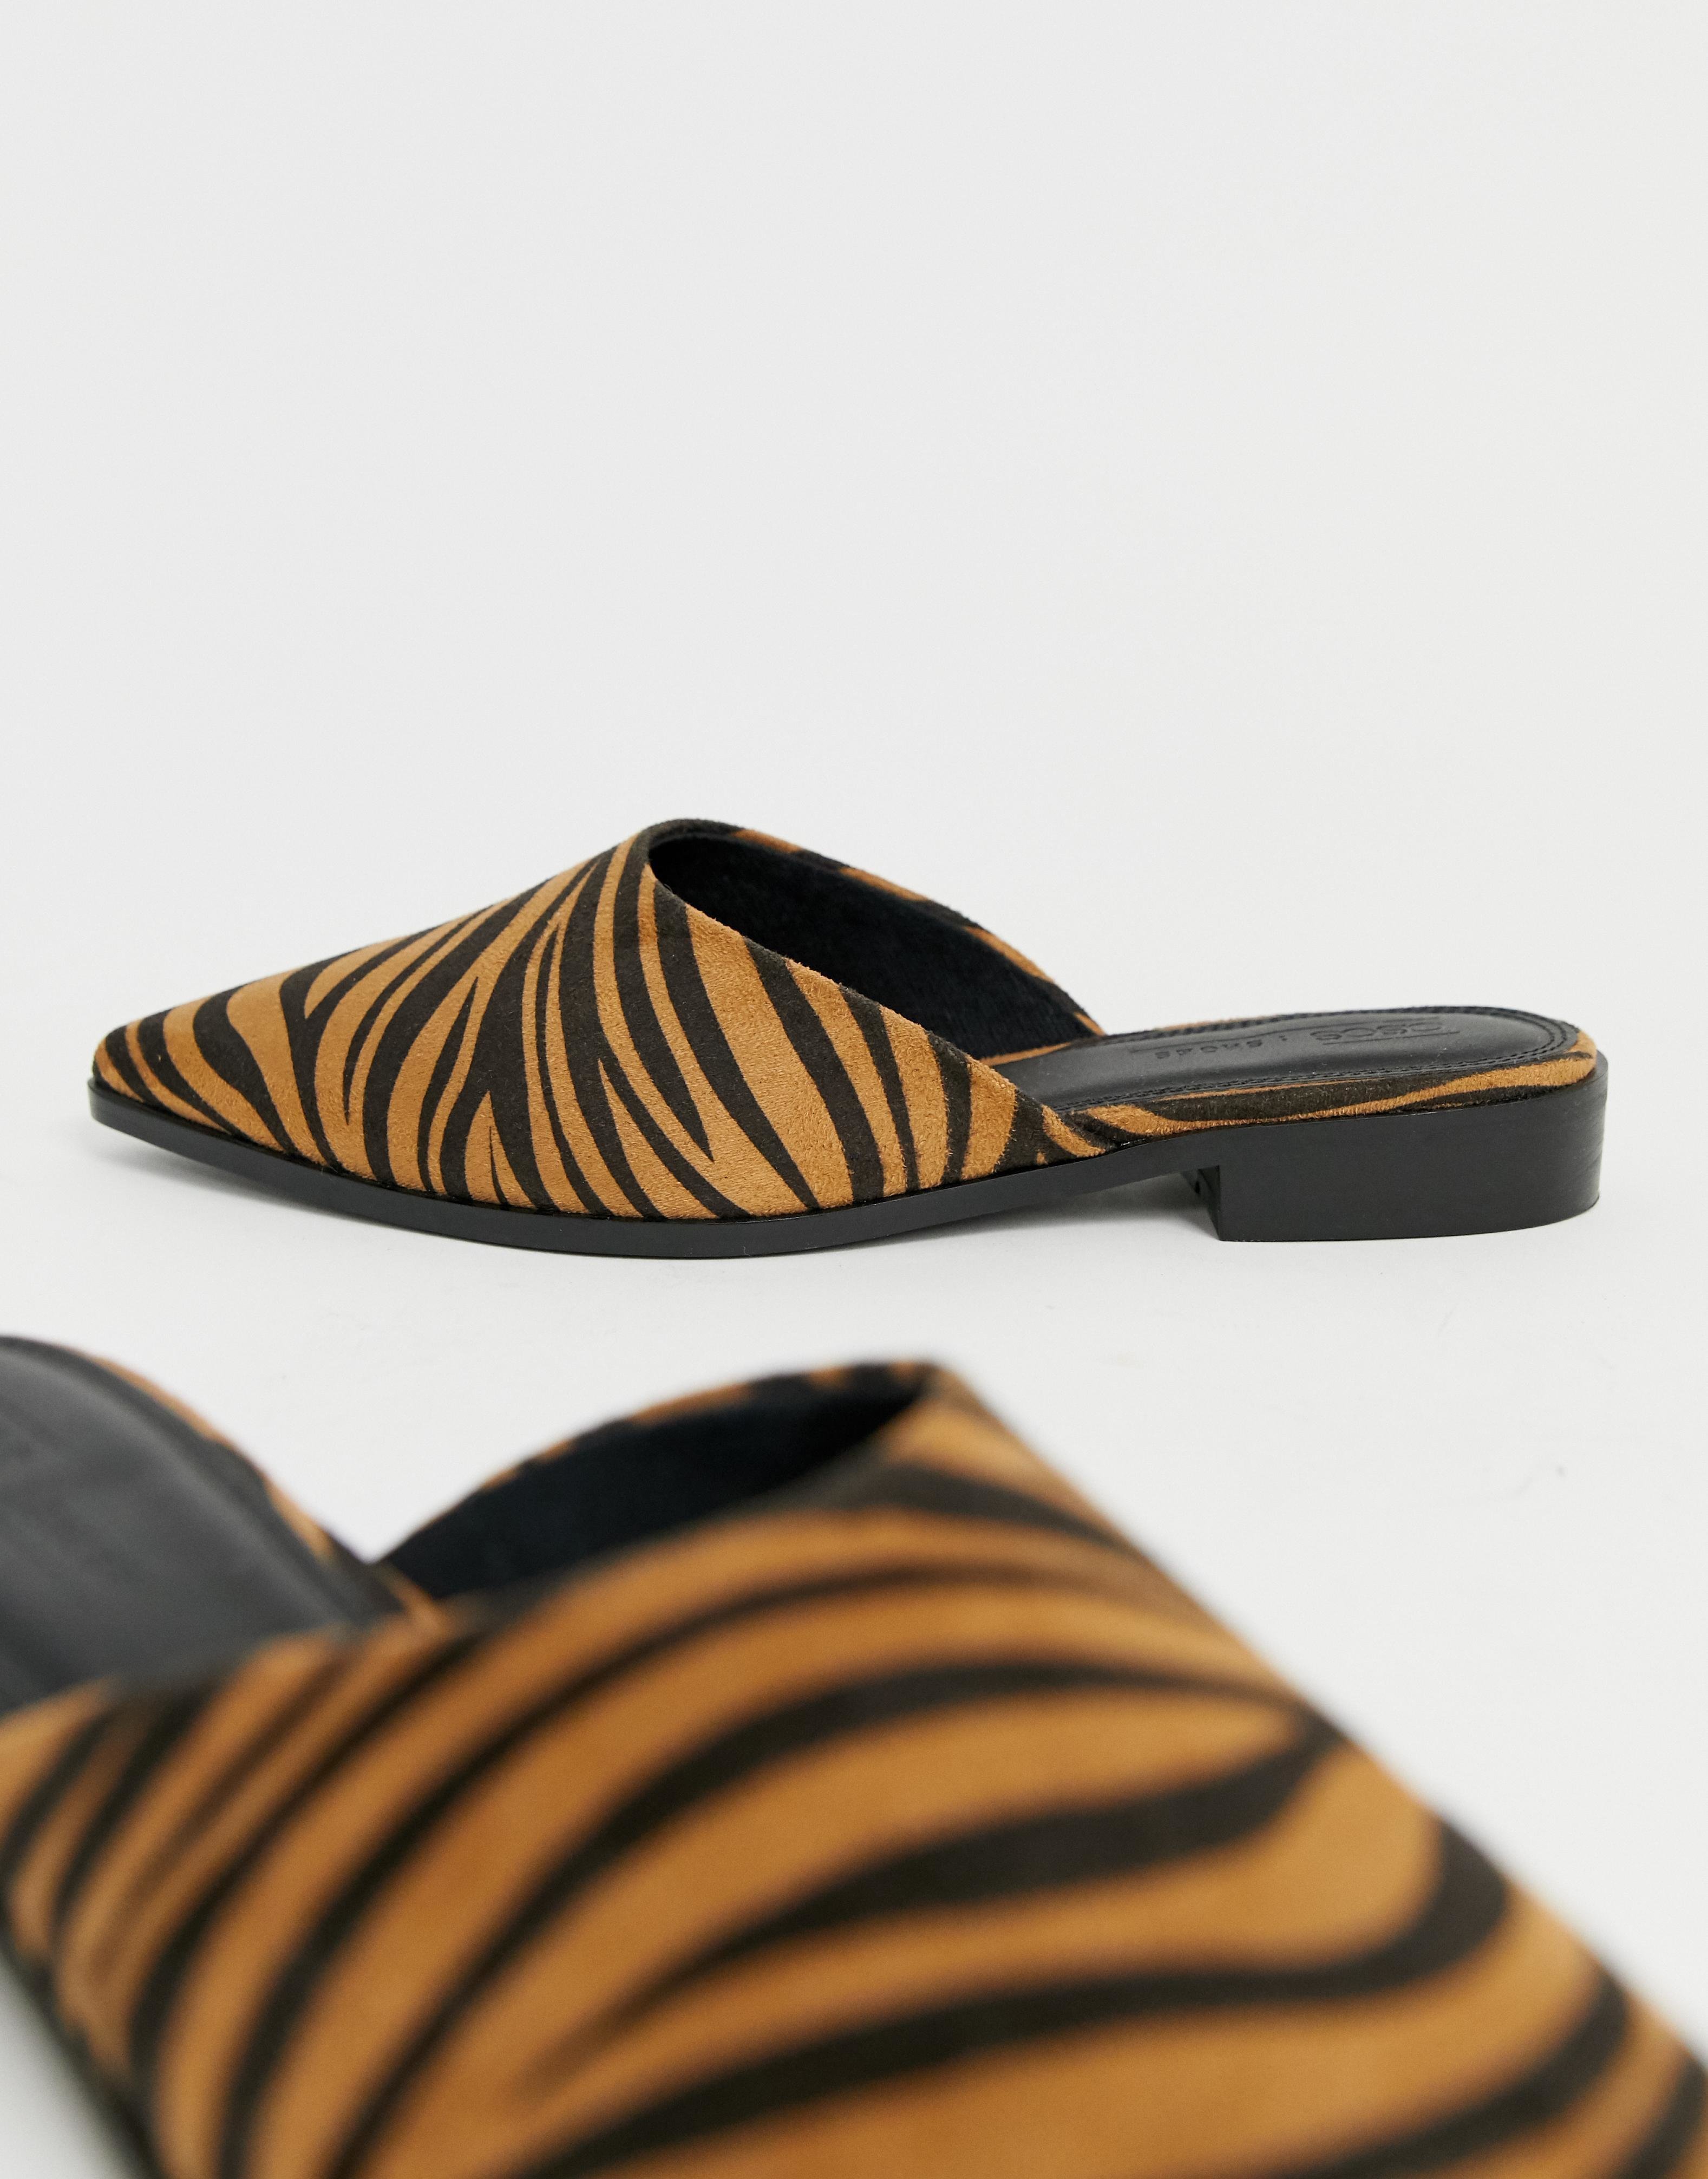 Asos Tiger Print Mules Are The Shoes To 